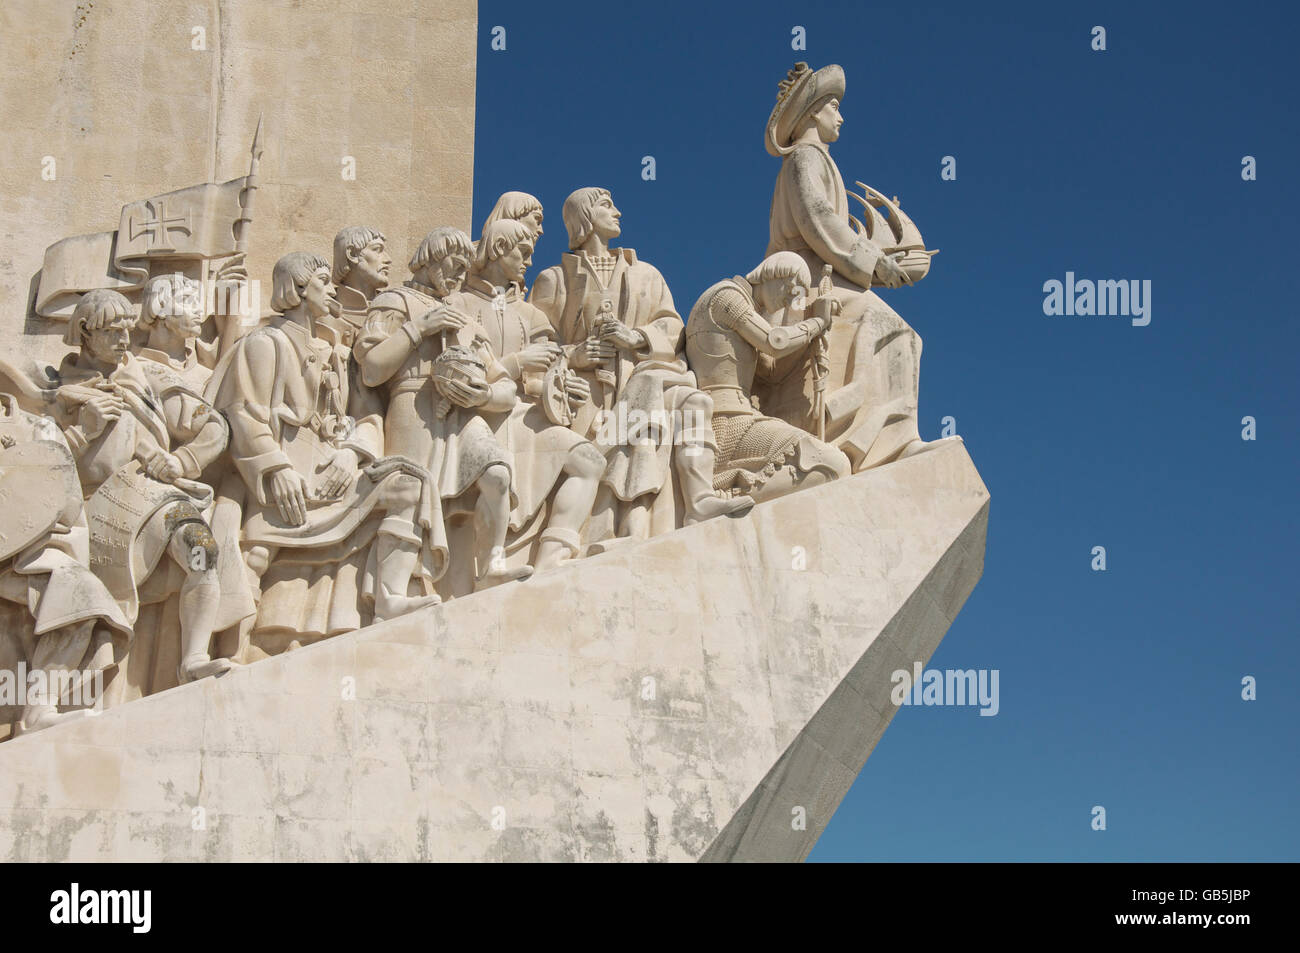 Monuments. The Monument to the Discoveries in Belém celebrates the great heroes of the Portuguese age of exploration and discovery. Lisbon, Portugal. Stock Photo